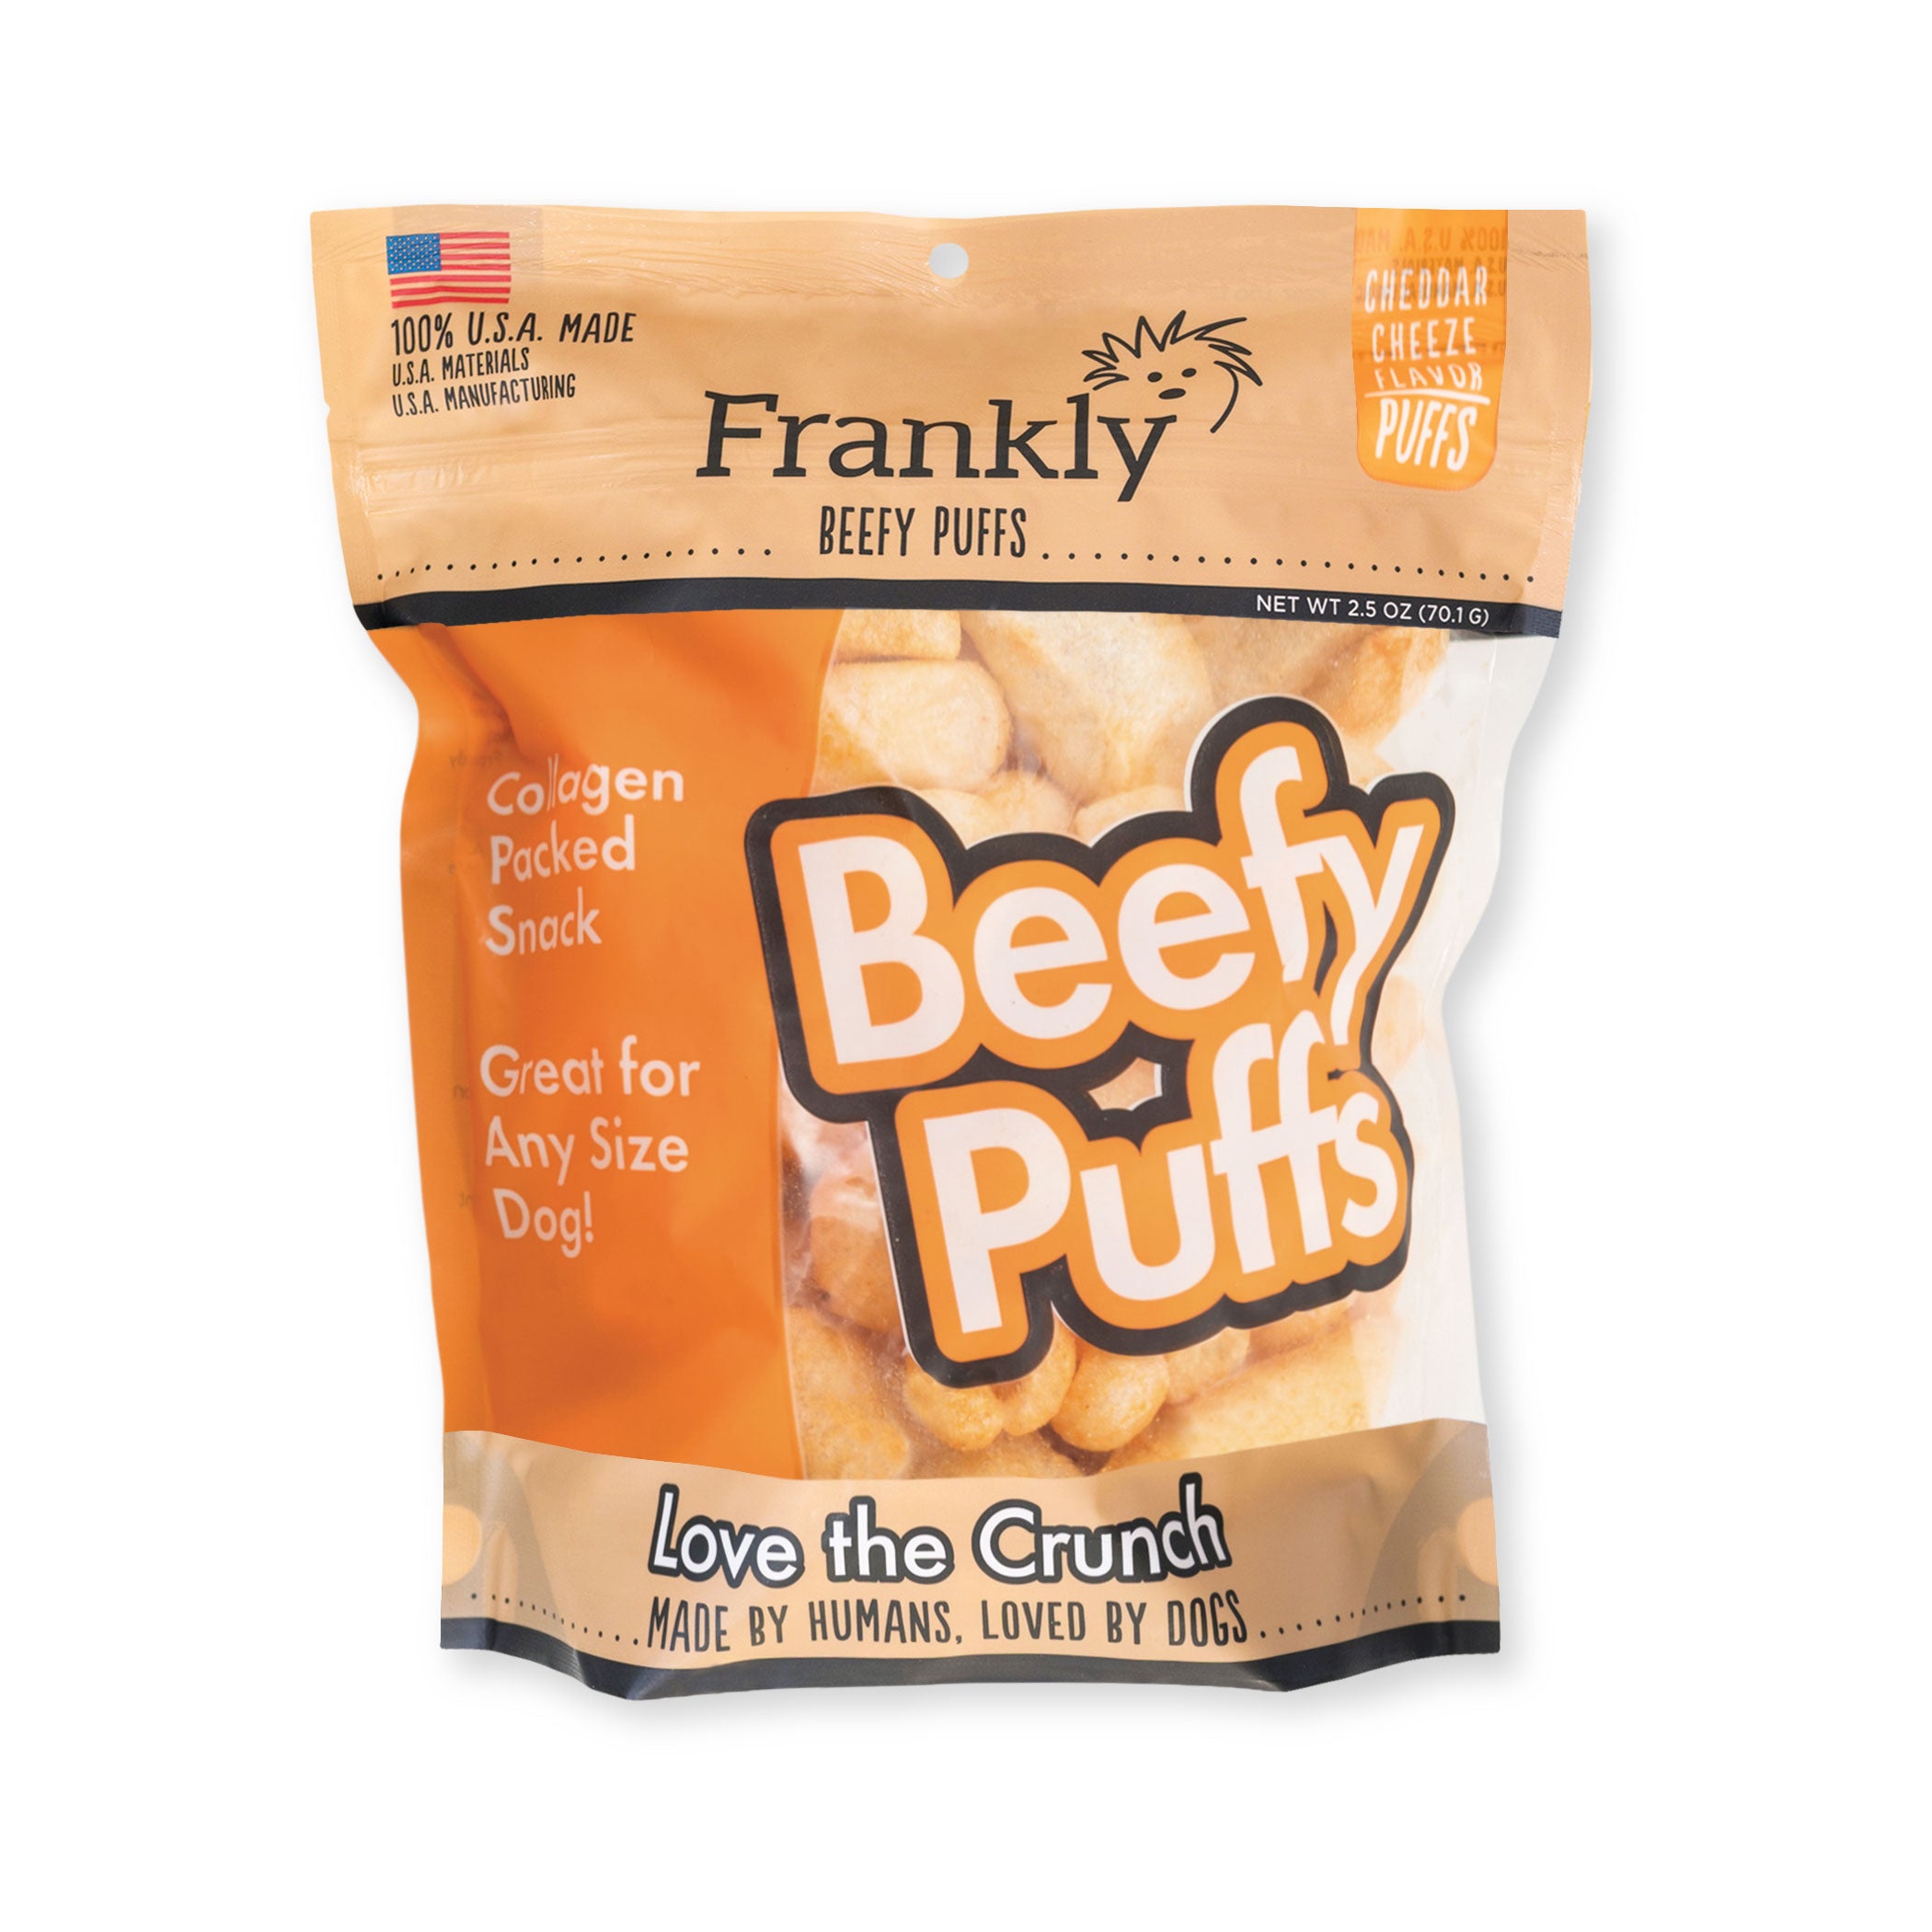 Frankly Pet Beefy Puffs Cheddar Cheeze Dog Treats, 5oz